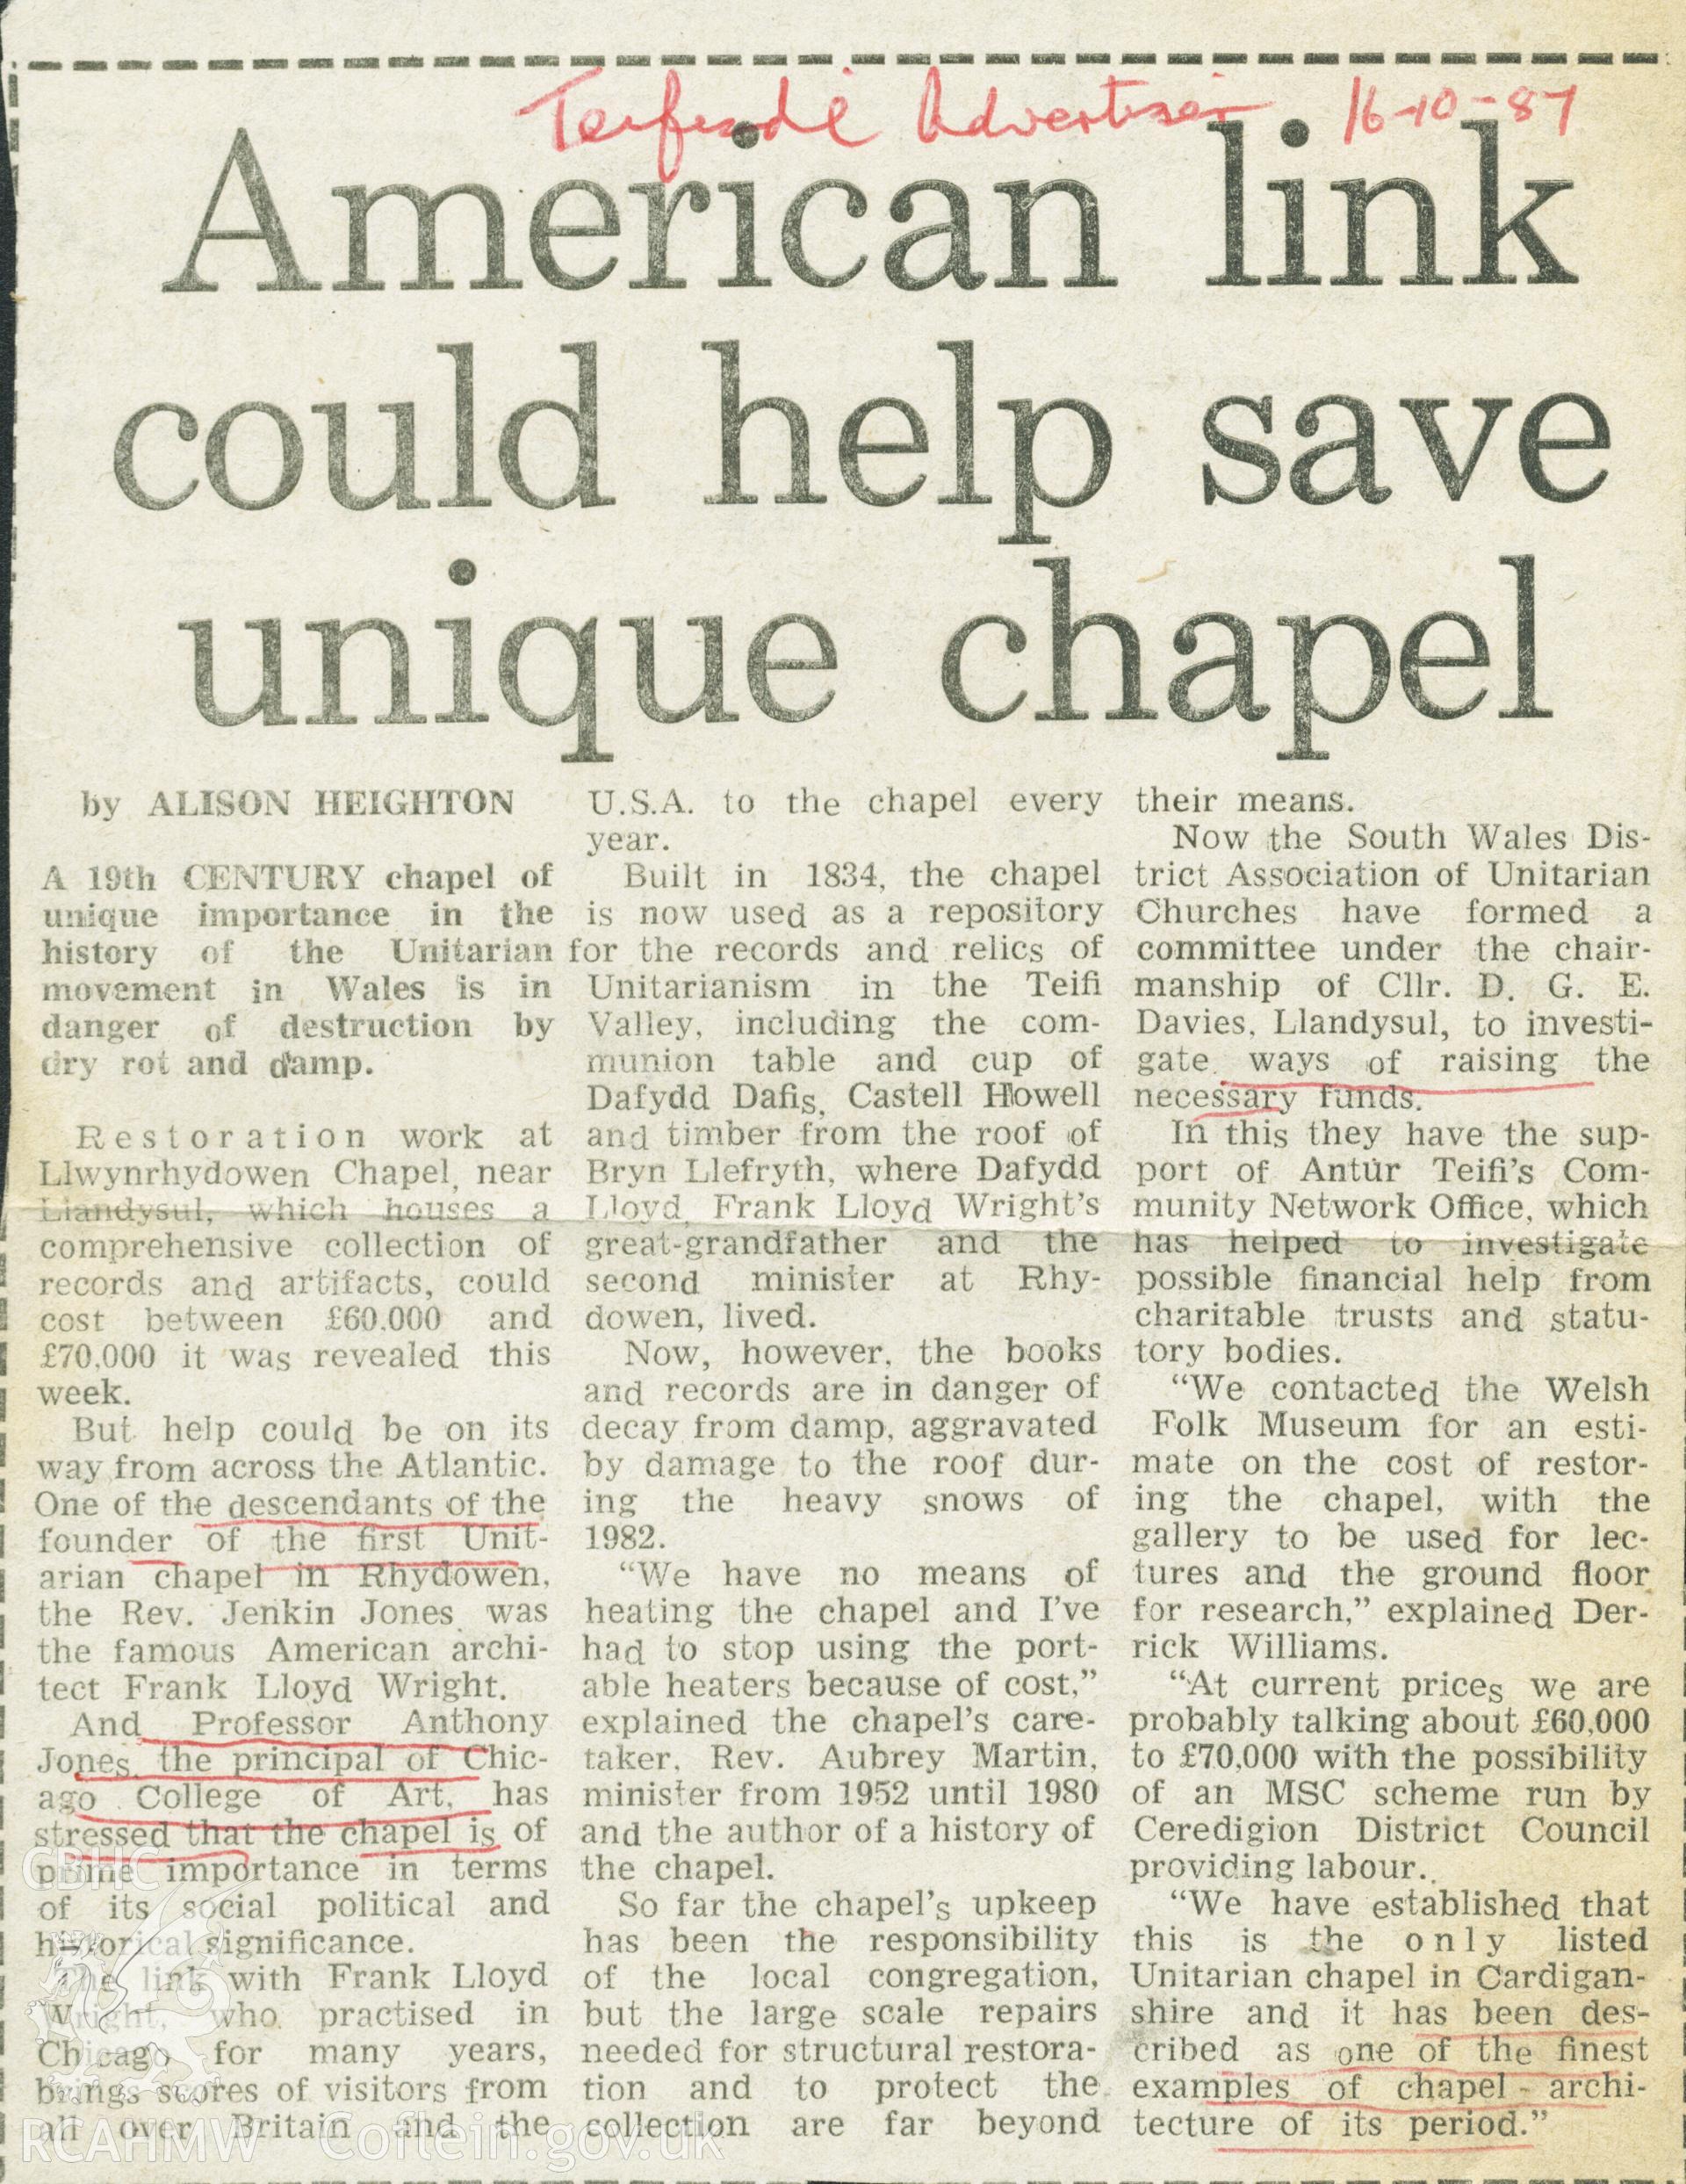 Article from the Telford Advertiser, 16th October 1987 entitled 'American link could help save unique chapel.' Donated to the RCAHMW during the Digital Dissent Project.